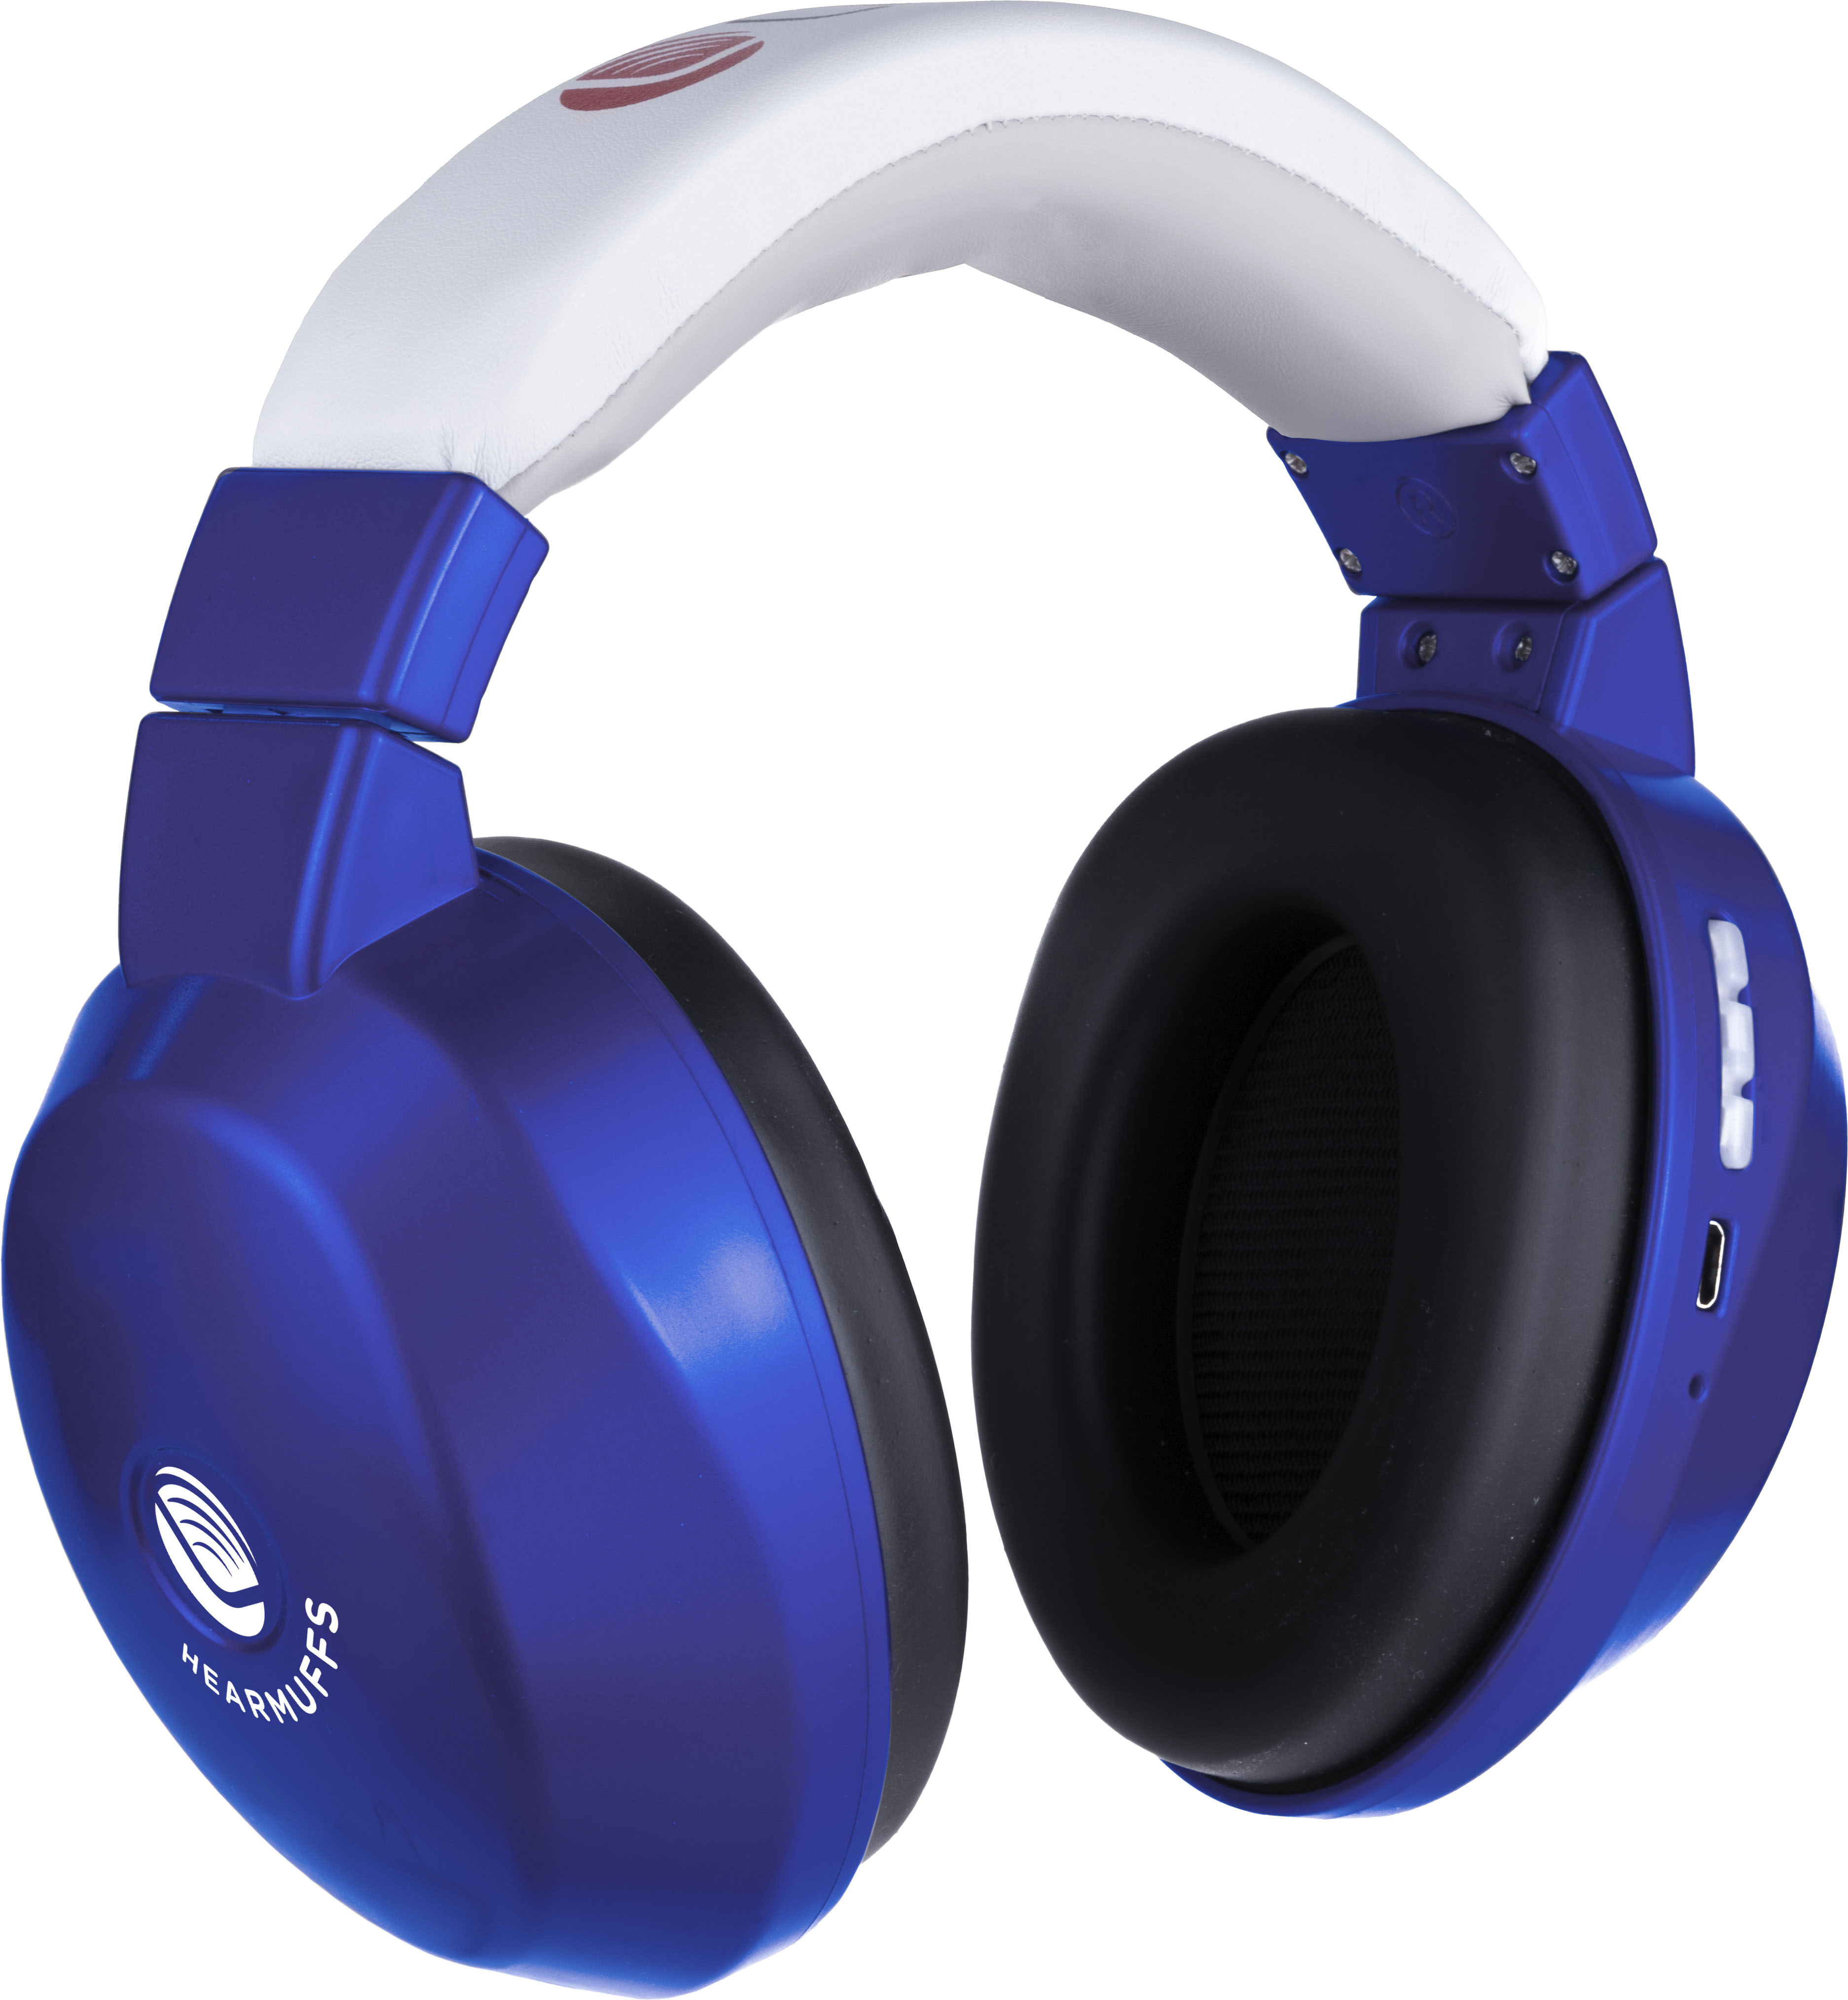 Angle View: Lucid Hearing - Bluetooth HearMuffs for Children - Hearing Protection Ear Muffs Ideal for Kids 5-10 Years Old - Blue